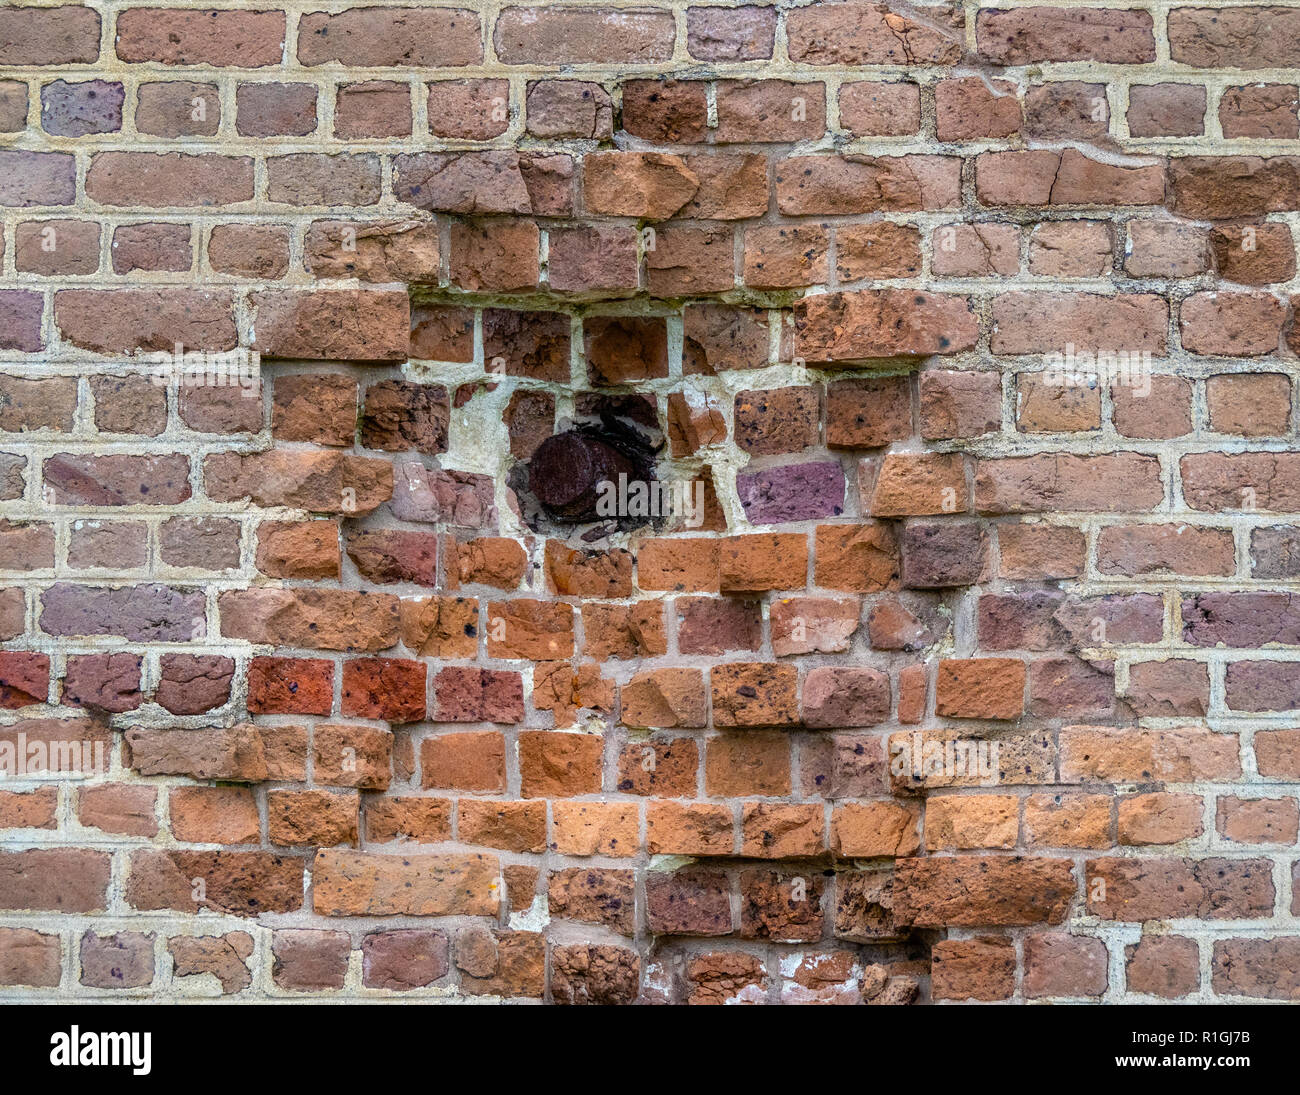 Rifled cannon shell from 1862 drilled through brickwork of Fort Pulaski National Monument guarding the Savannah River in Georgia USA Stock Photo